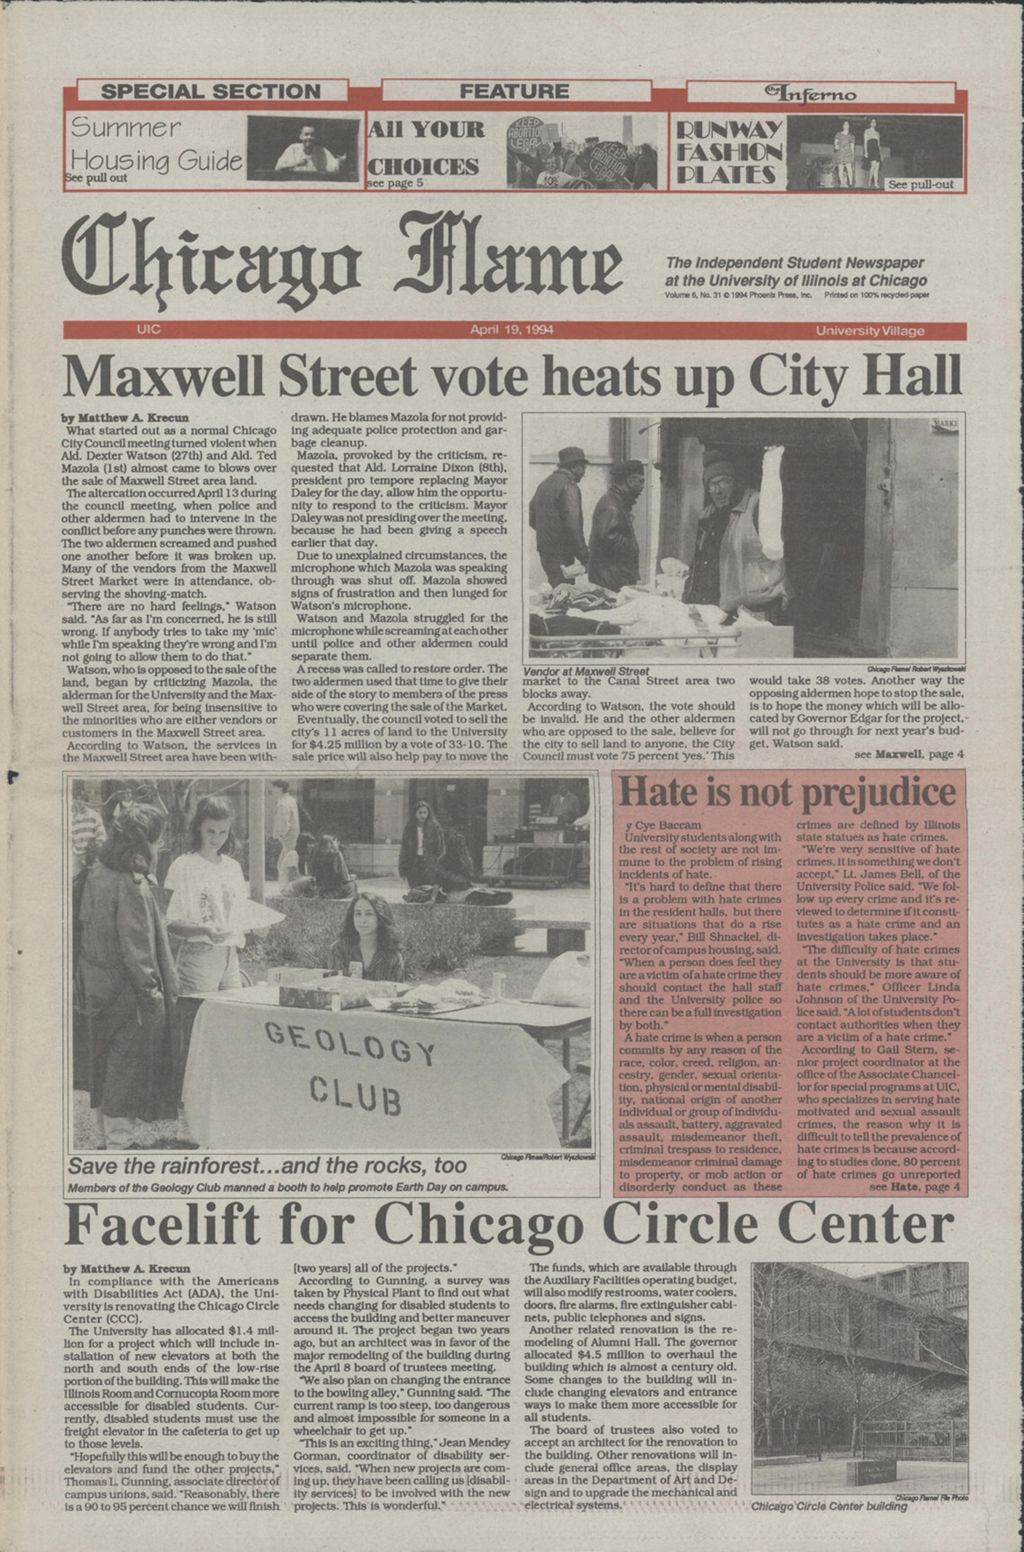 Chicago Flame (April 19, 1994)